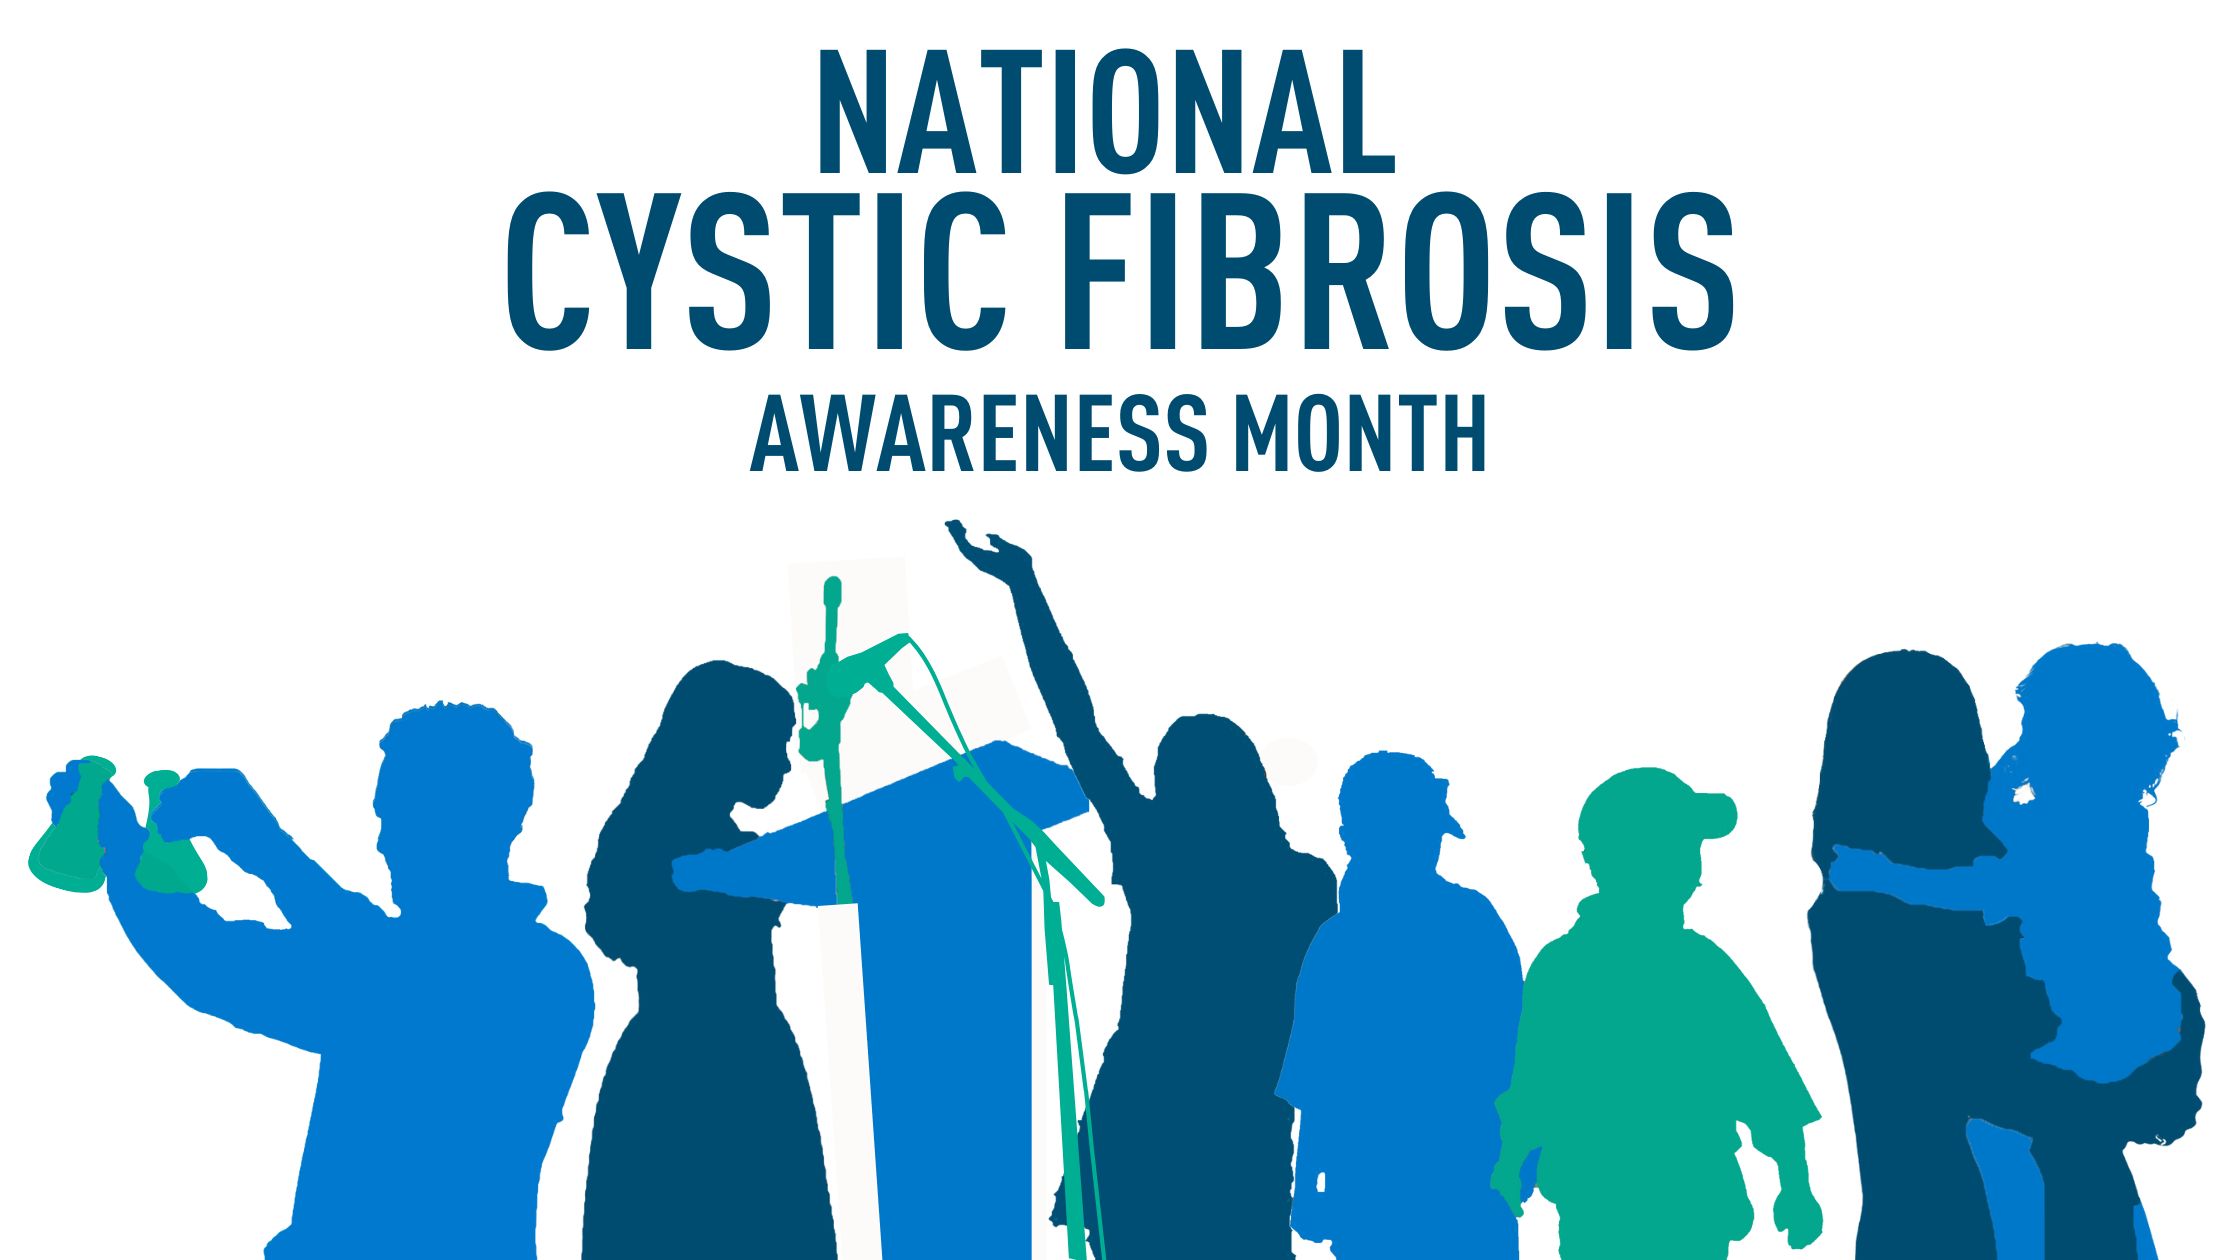 National Cystic Fibrosis Awareness month photo with volunteer silhouettes